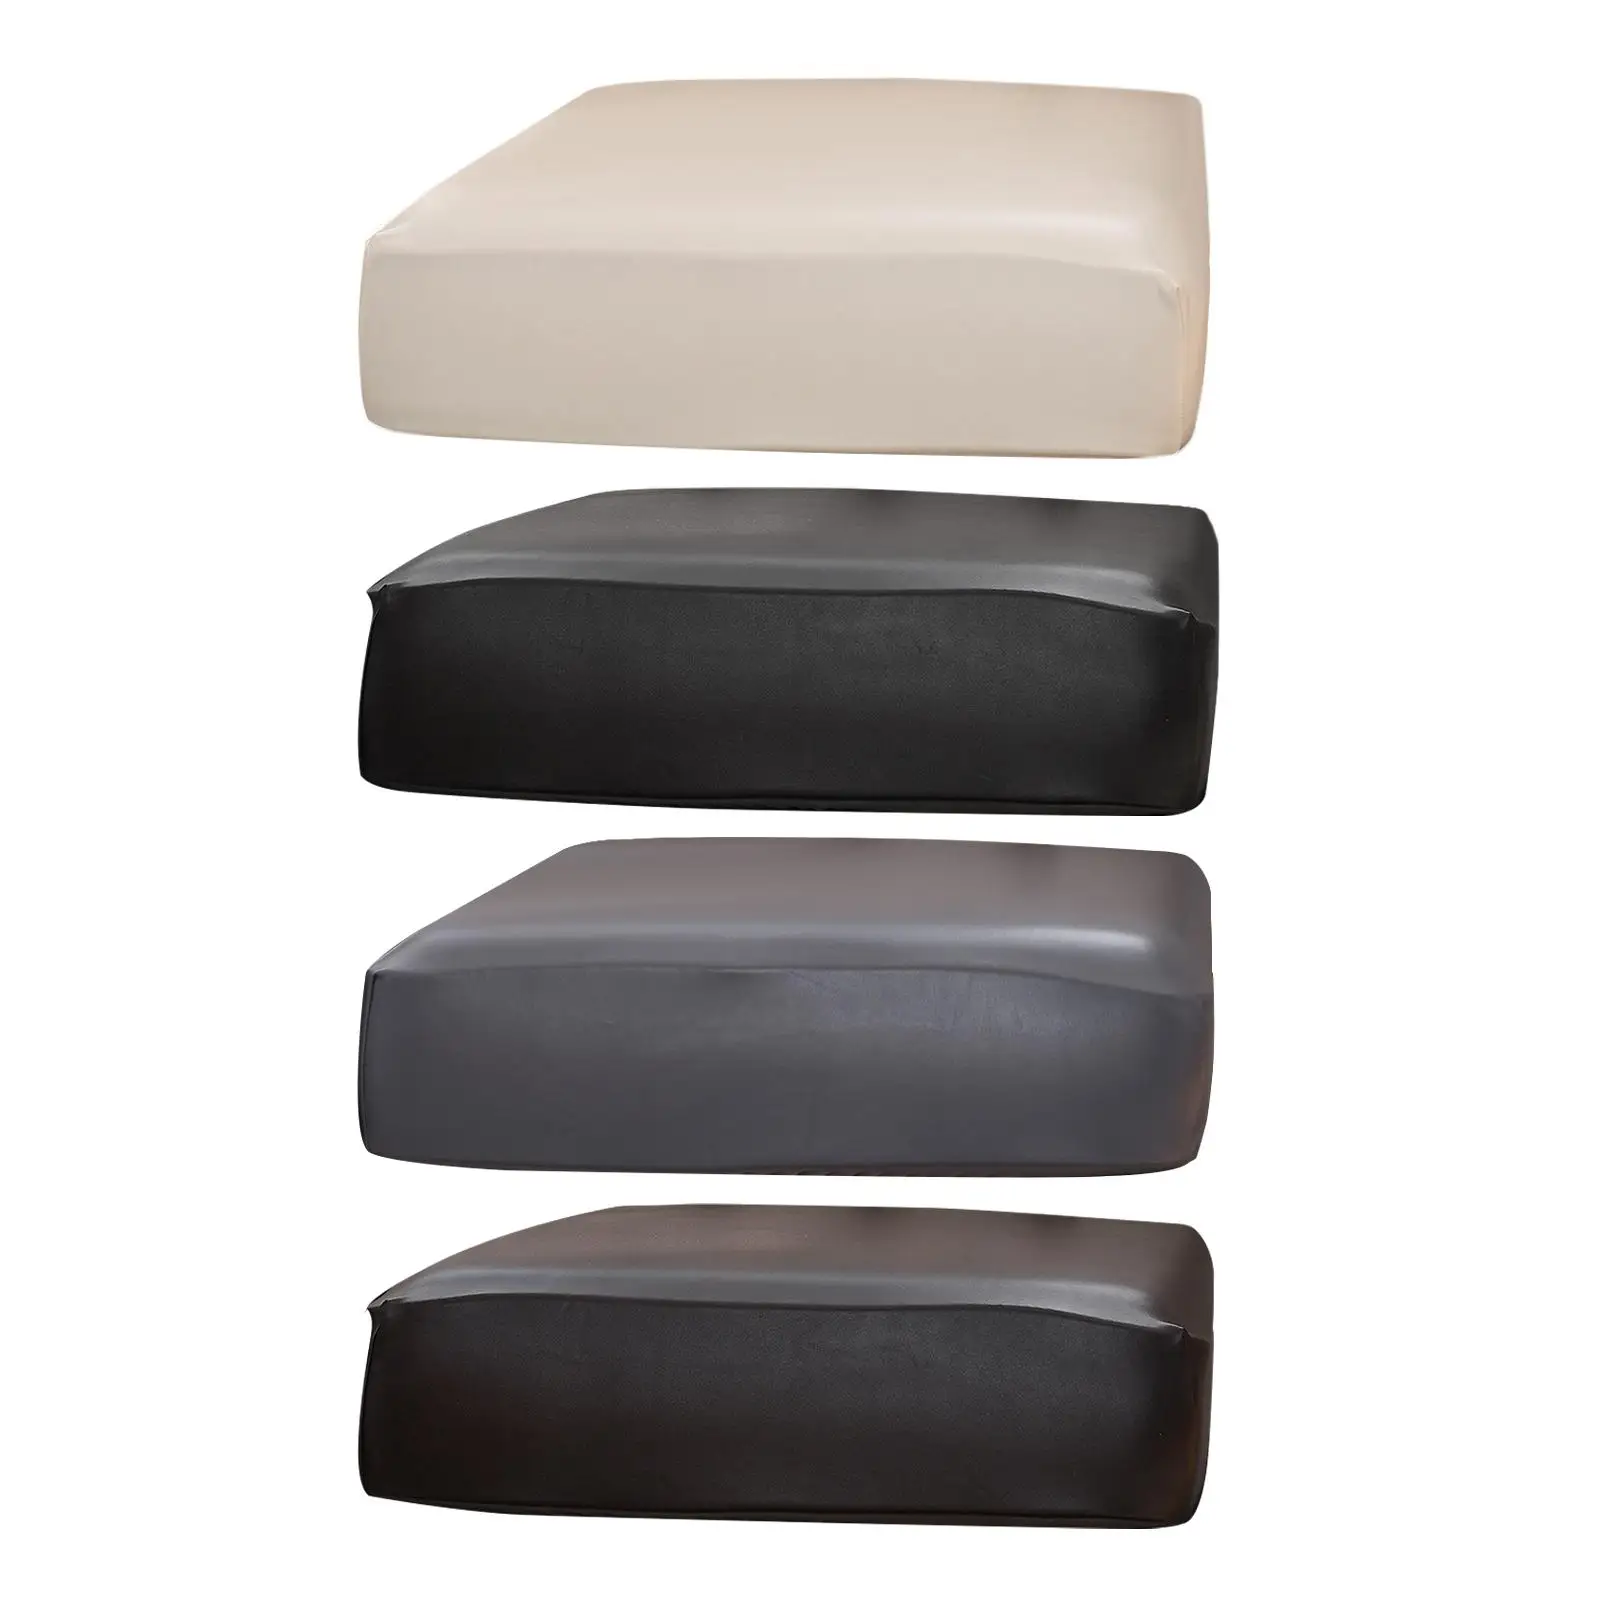 PU Leather Sofa Cushions Cover Protector Case Stretchy for Living Room